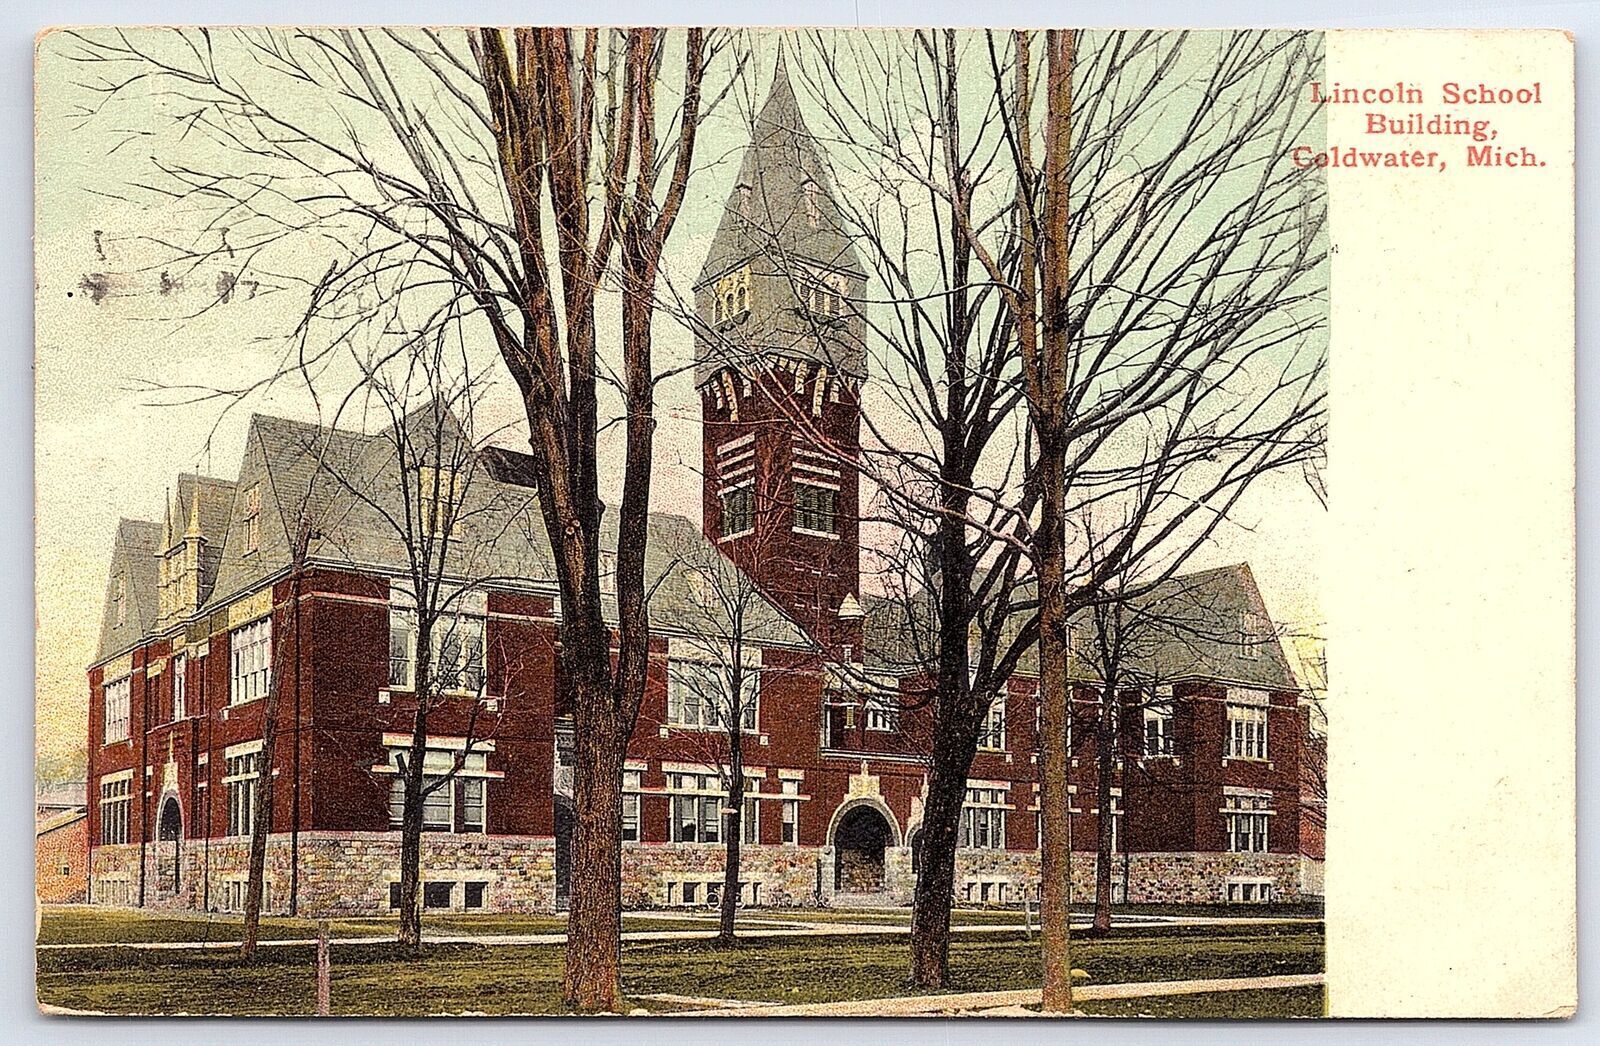 1908 Lincoln School Building Learning Center Coldwater Michigan Posted Postcard